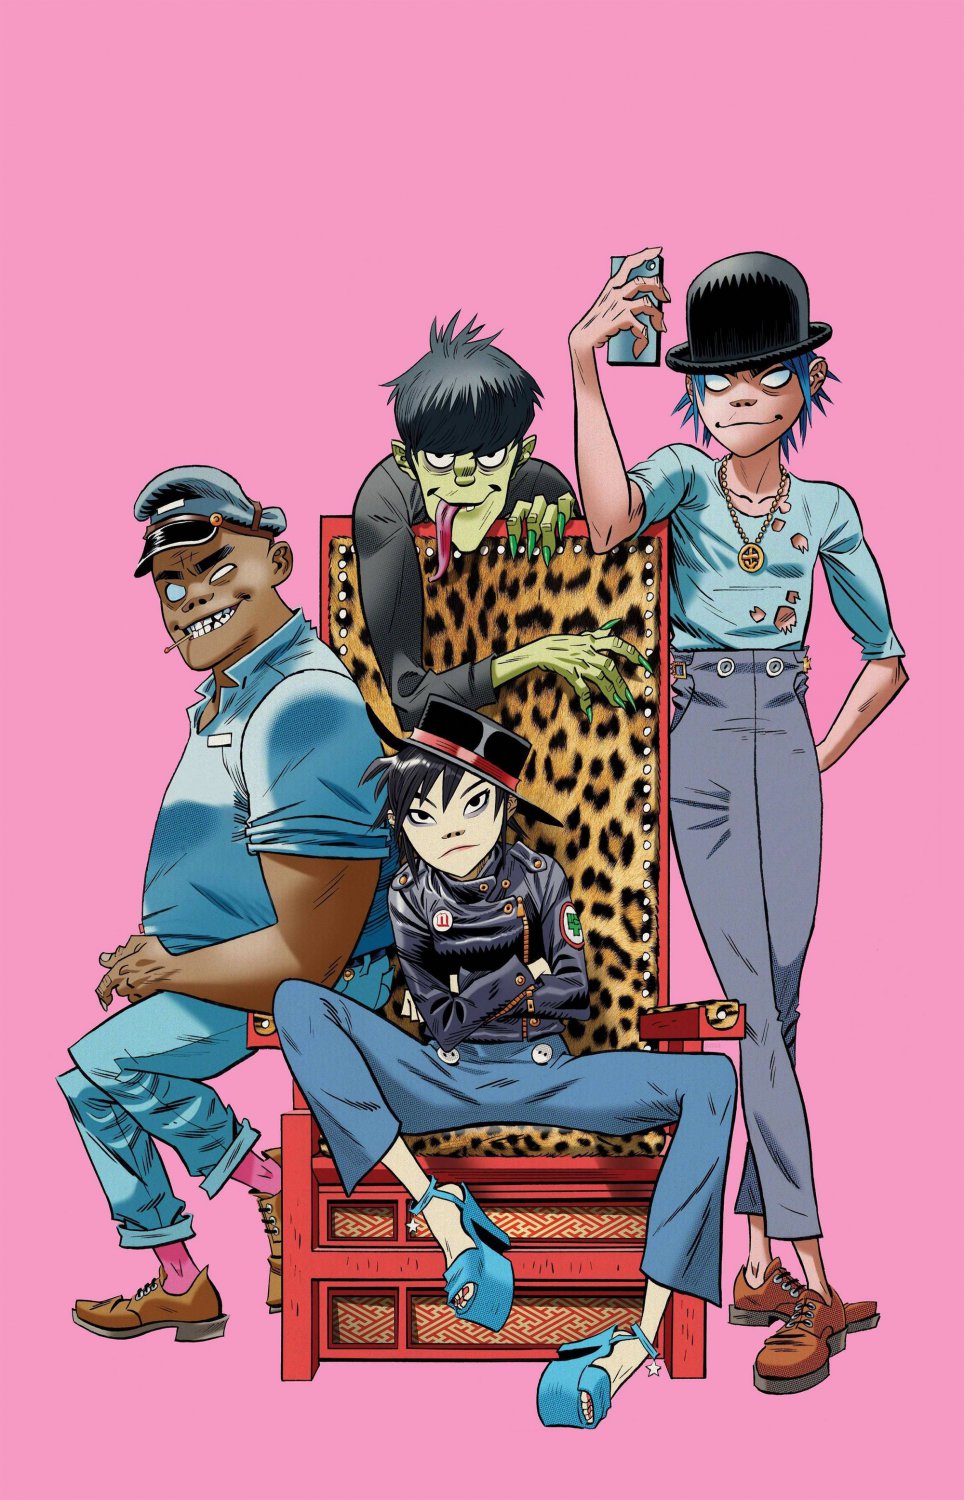 Gorillaz Humility 13"x19" (32cm/49cm) Polyester Fabric Poster